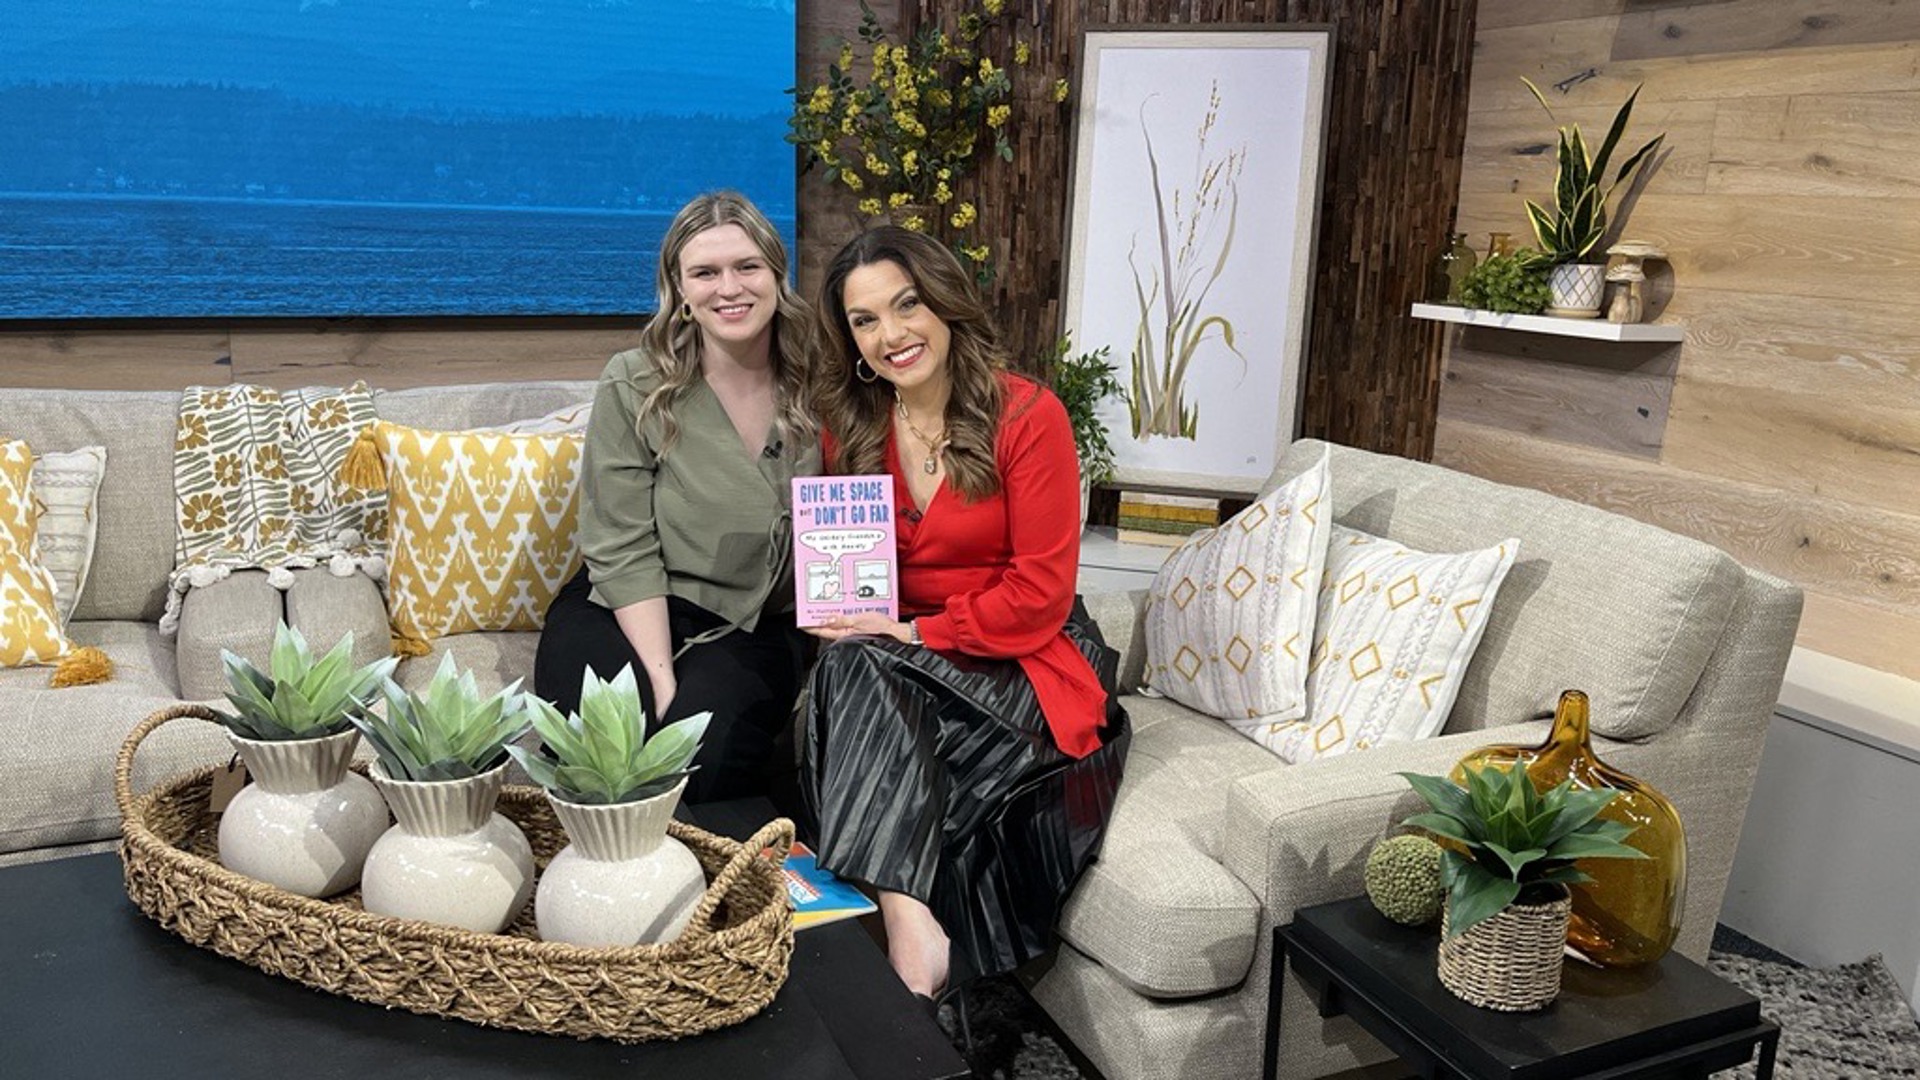 Haley Weaver's new book "Give Me Space...But Don't Go Far" explains how she coexists with her anxiety and the coping mechanisms she's learned. #newdaynw